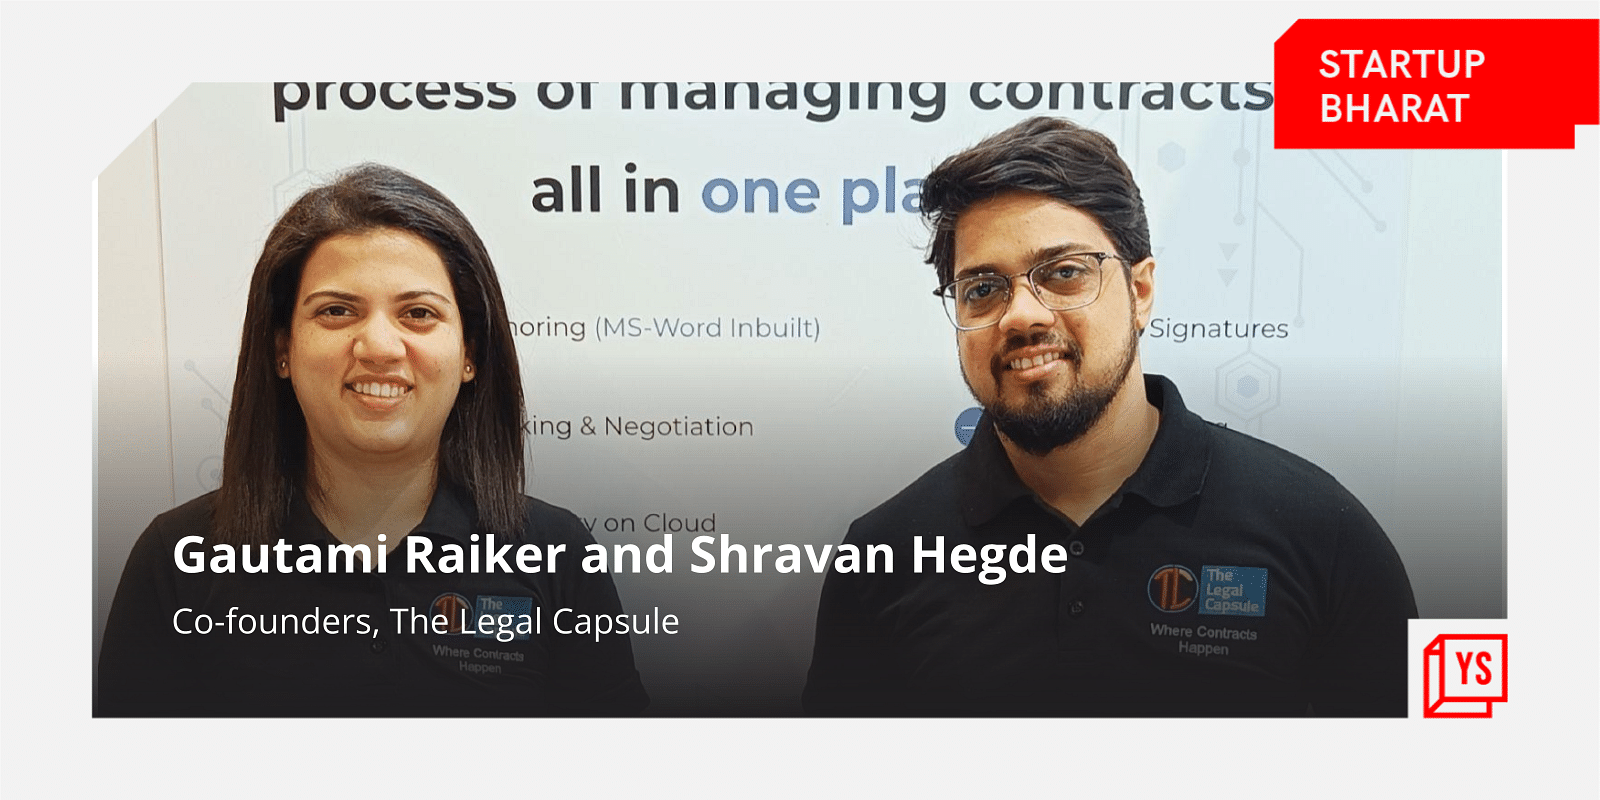 You are currently viewing [Startup Bharat] This legaltech firm is helping companies automate contract management with its AI/ML solution